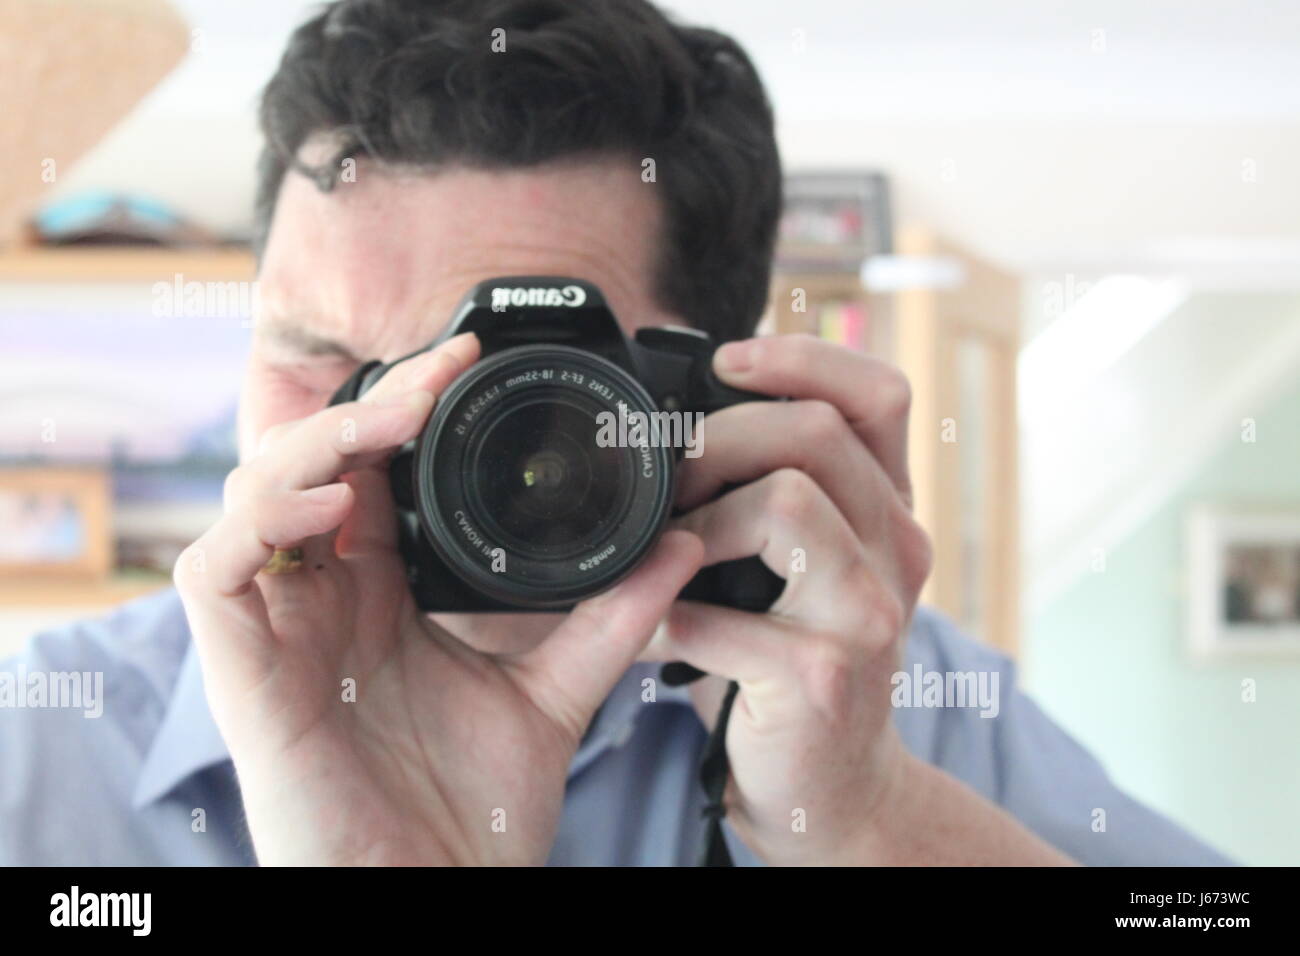 Man with black hair and blue shirt taking a self portrait photo in a mirror inside a house Stock Photo